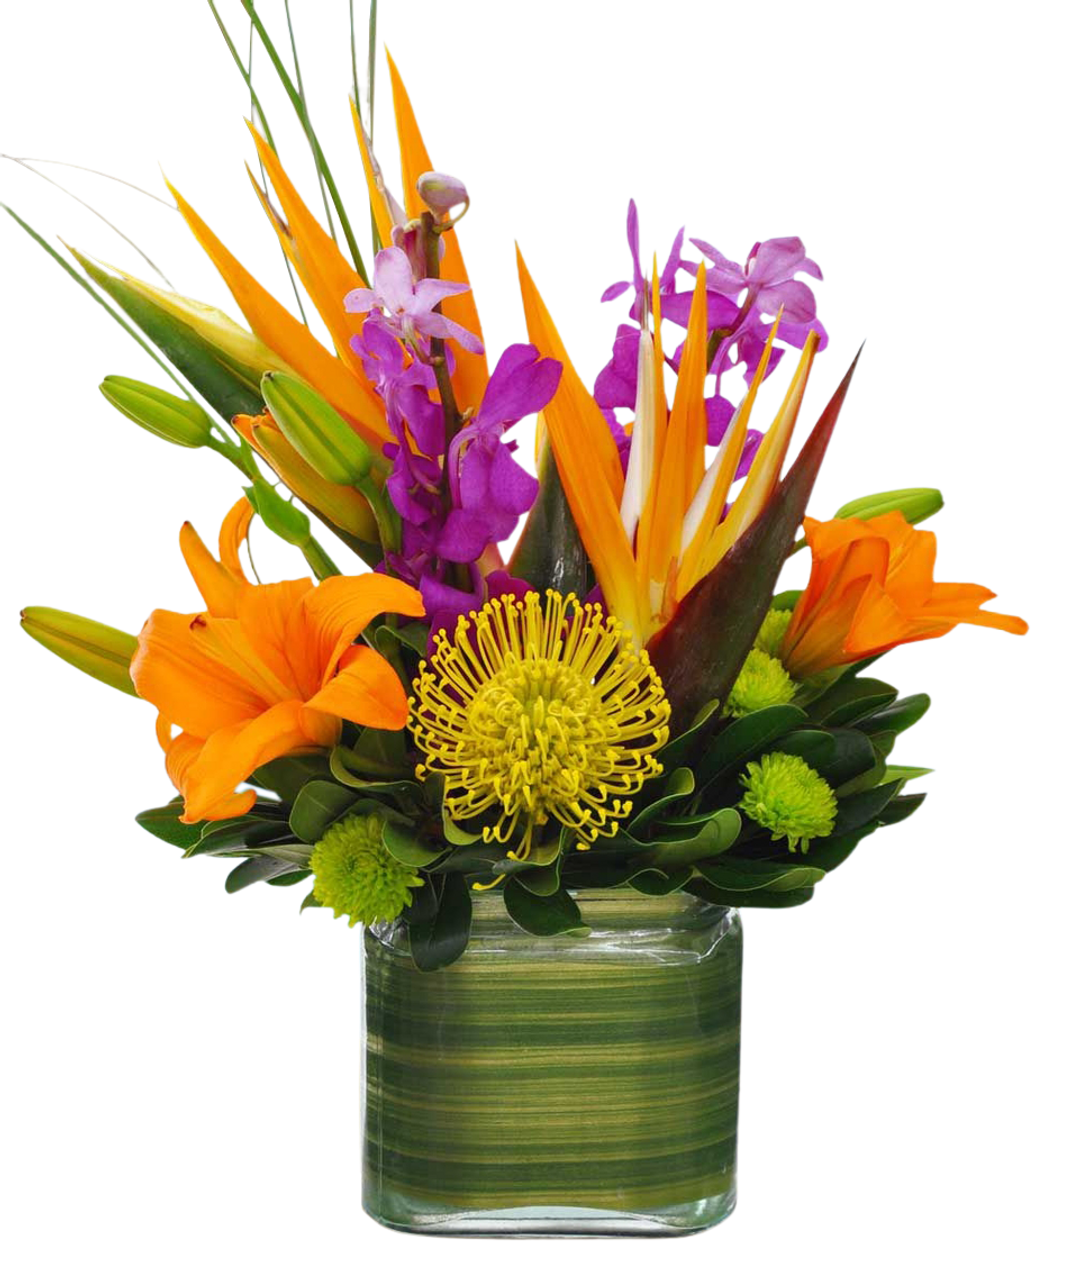 39 Sympathy Message Examples for Funeral Flowers